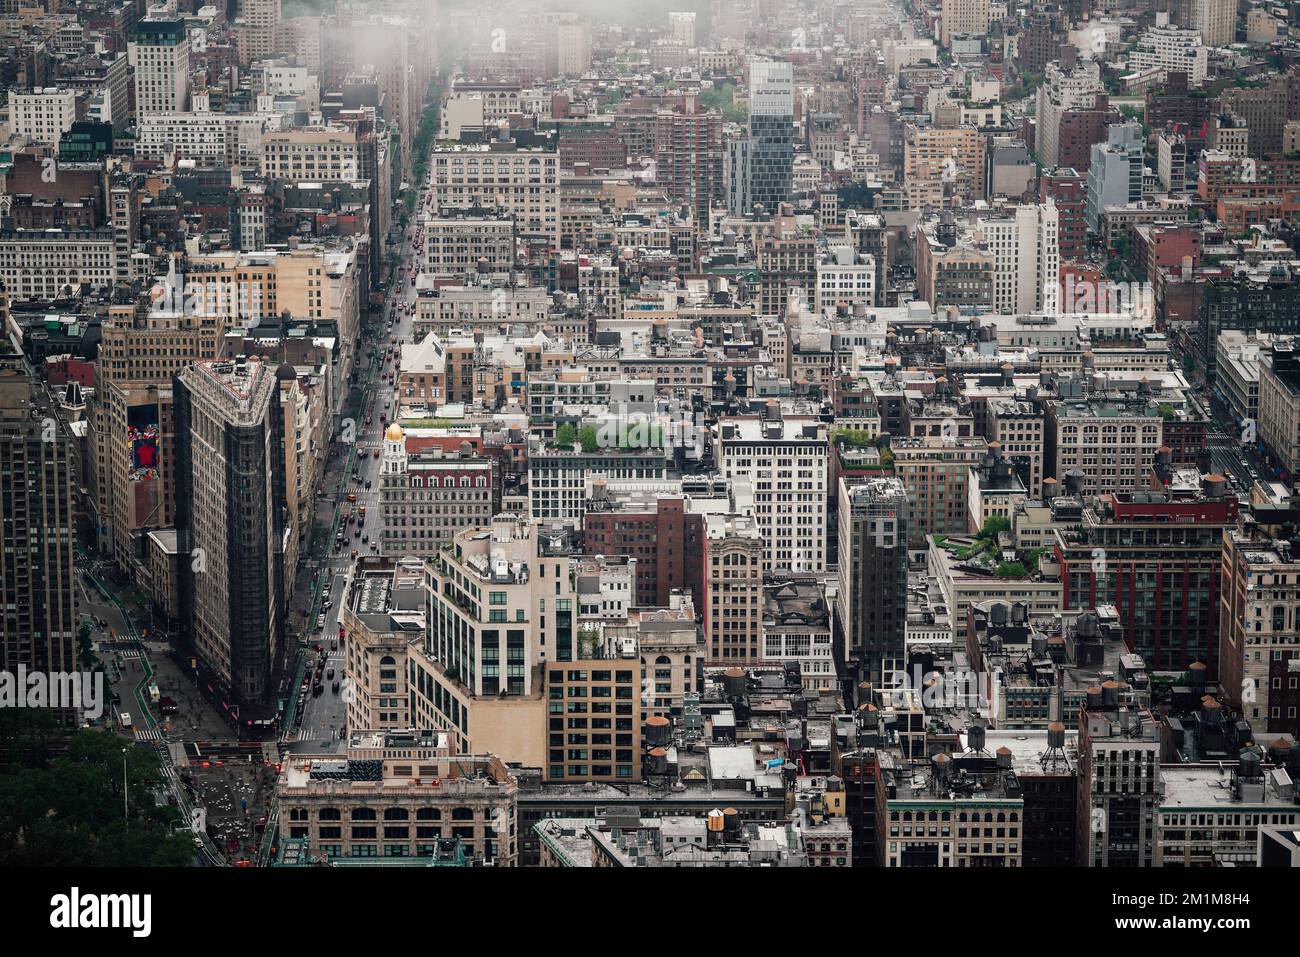 A misty day in Midtown, Flatiron on the left. Stock Photo